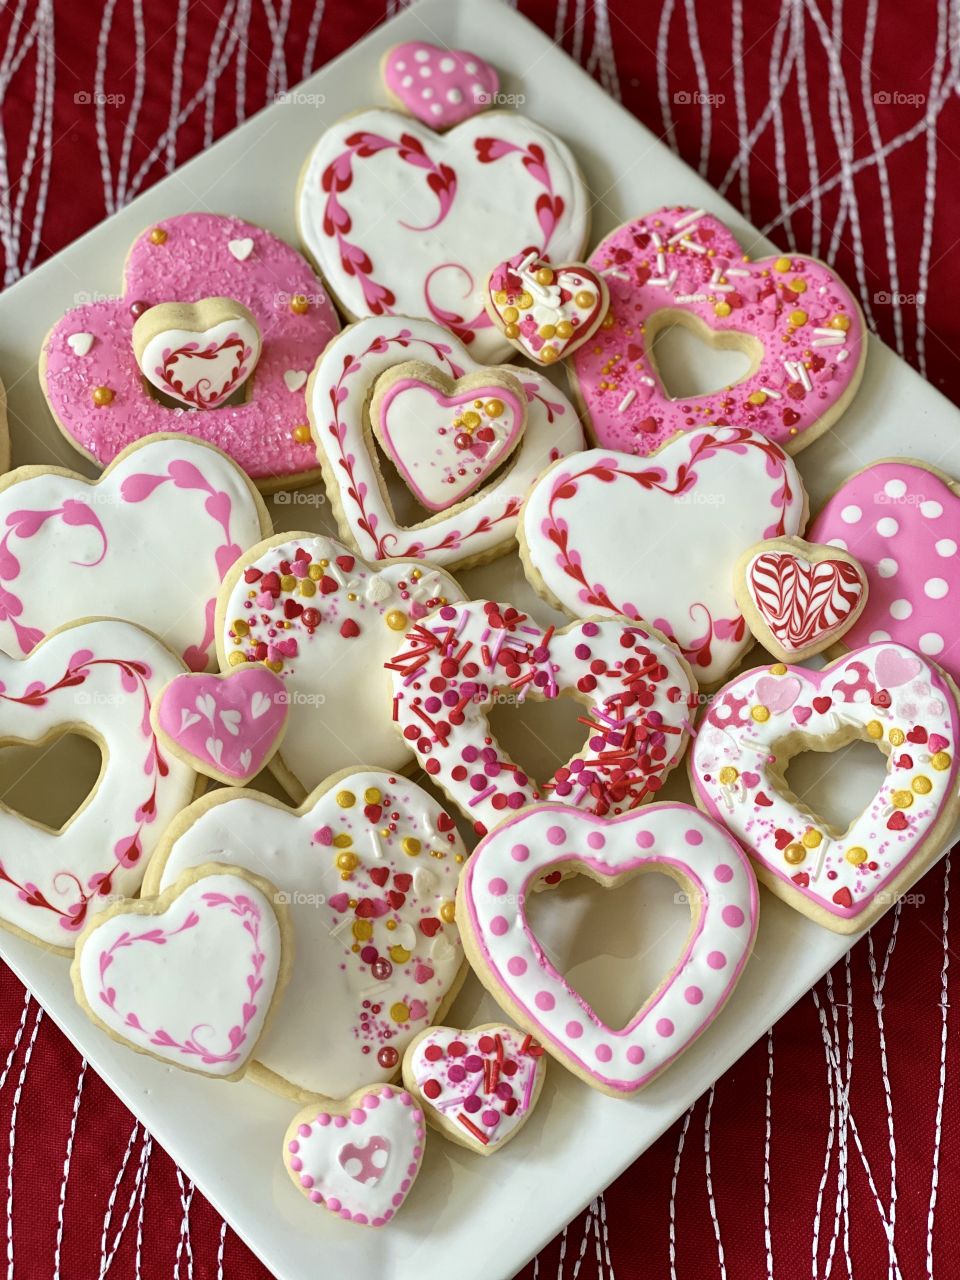 A beautiful plate of Valentine’s Day cookies frosted with royal icing.